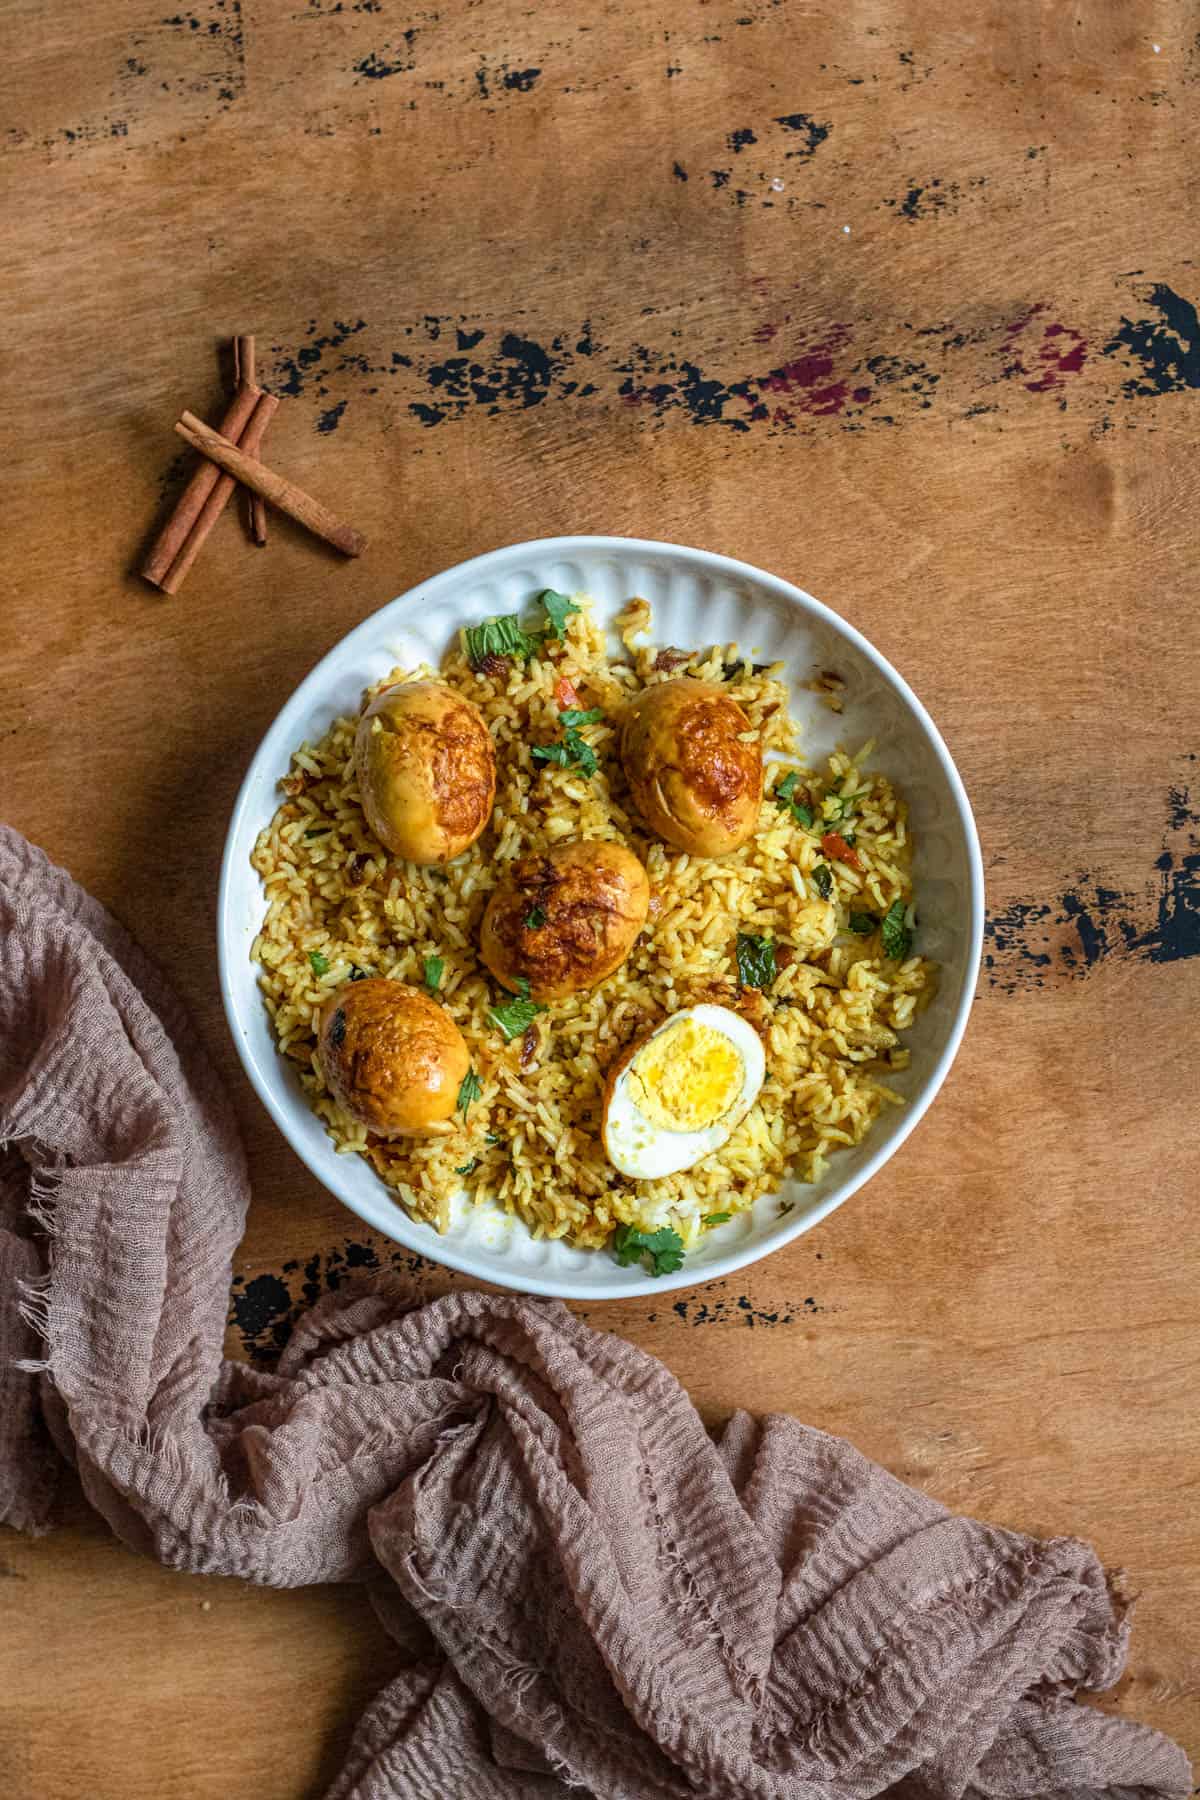 A plate of egg biryani with some cinnamon sticks on the table next to it. 